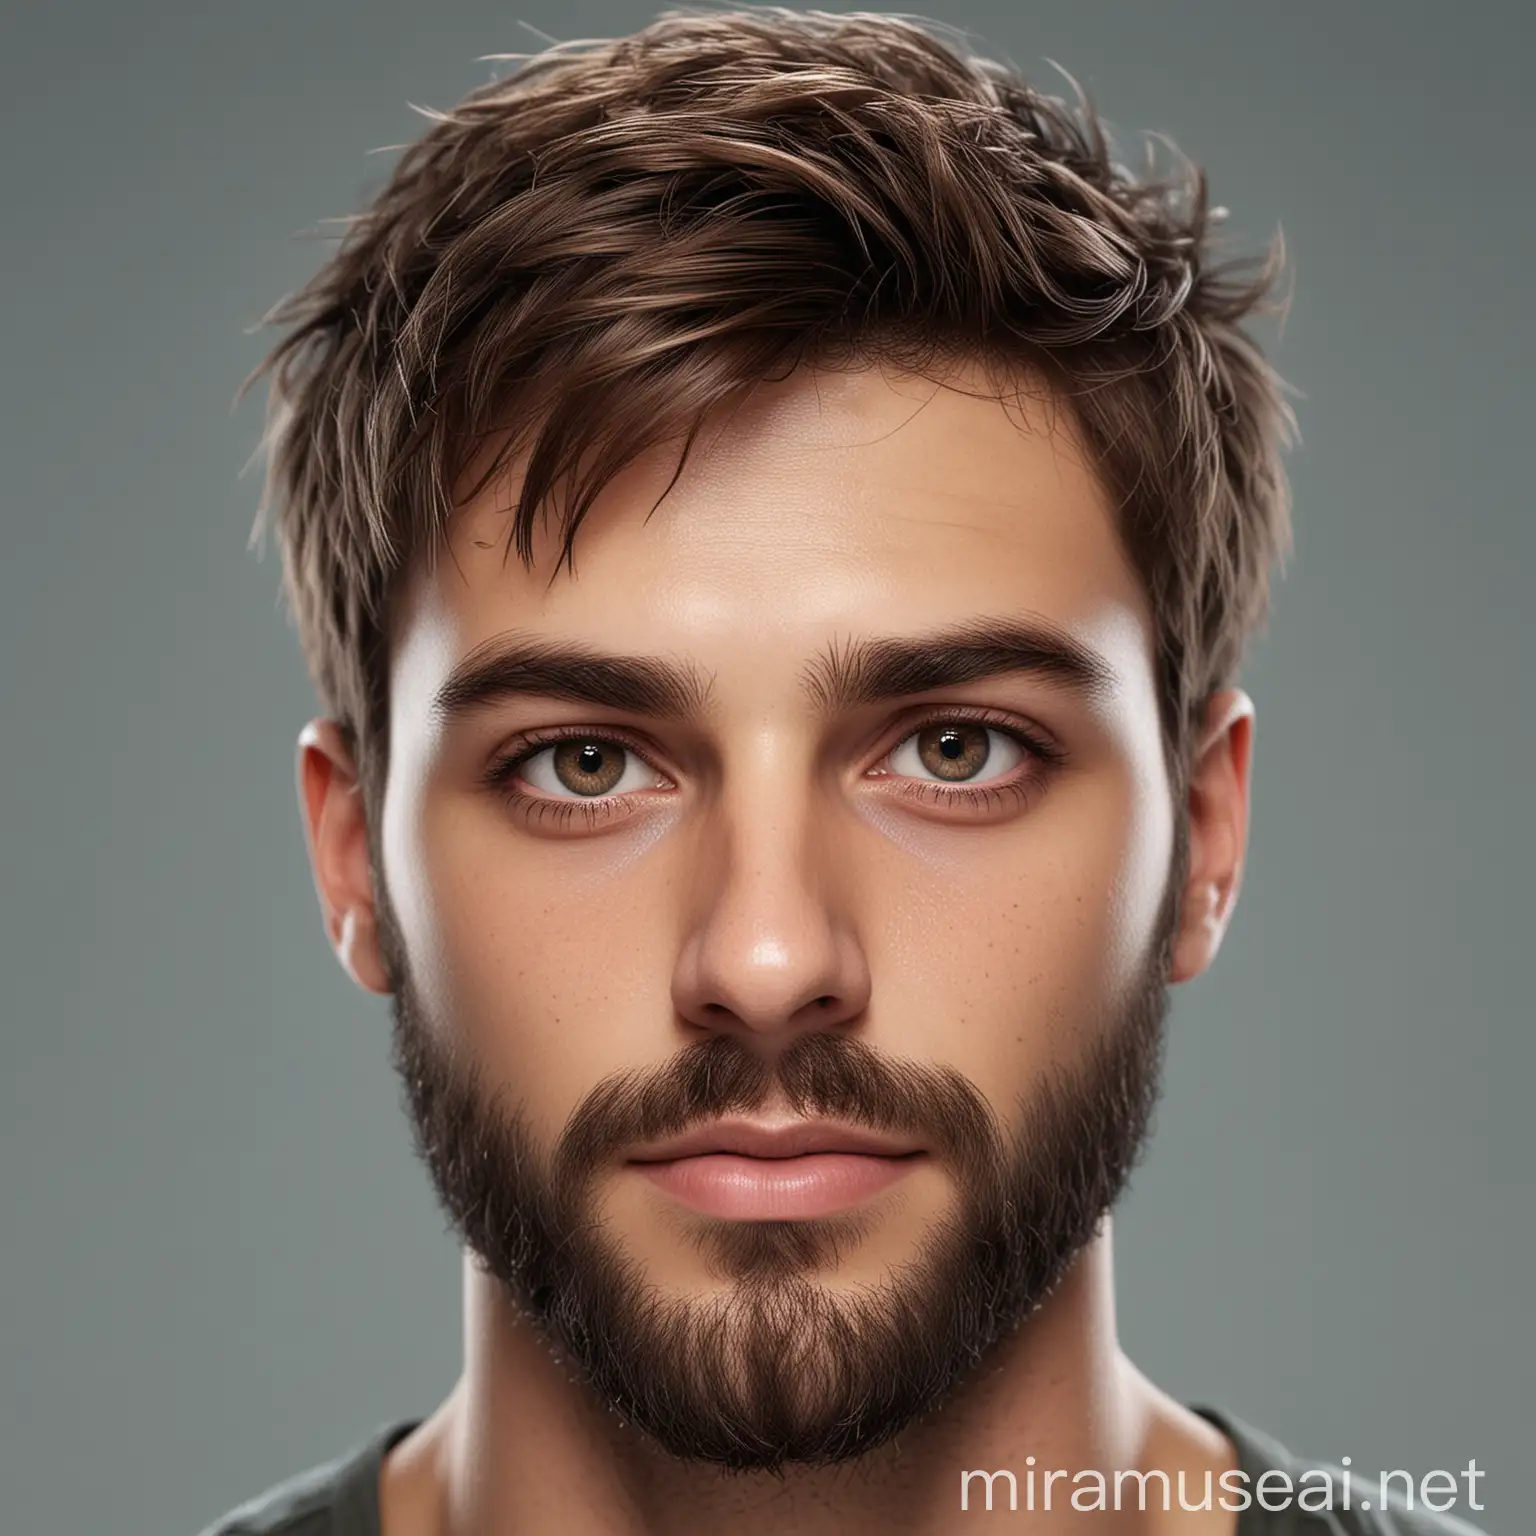 Hyperrealistic Portrait of a Man with Clear Eyes and Brown Hair